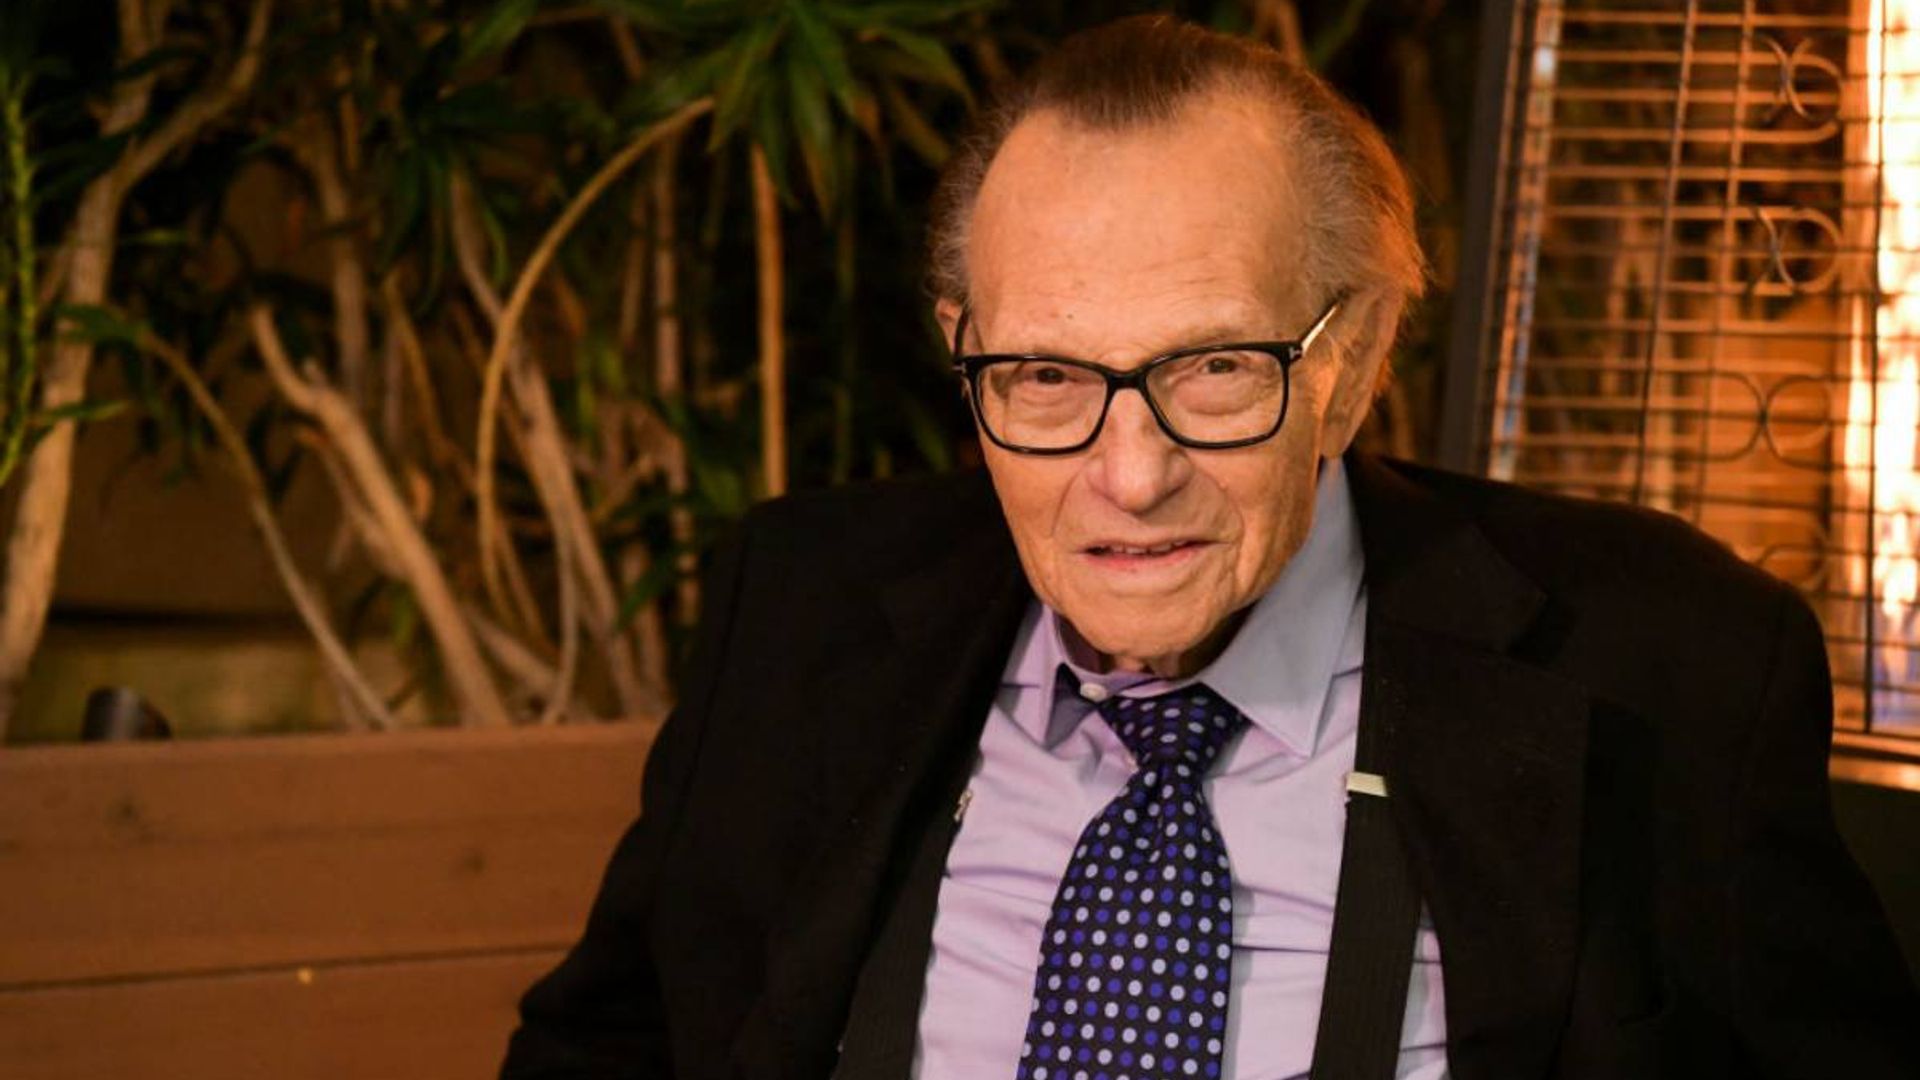 larry king died